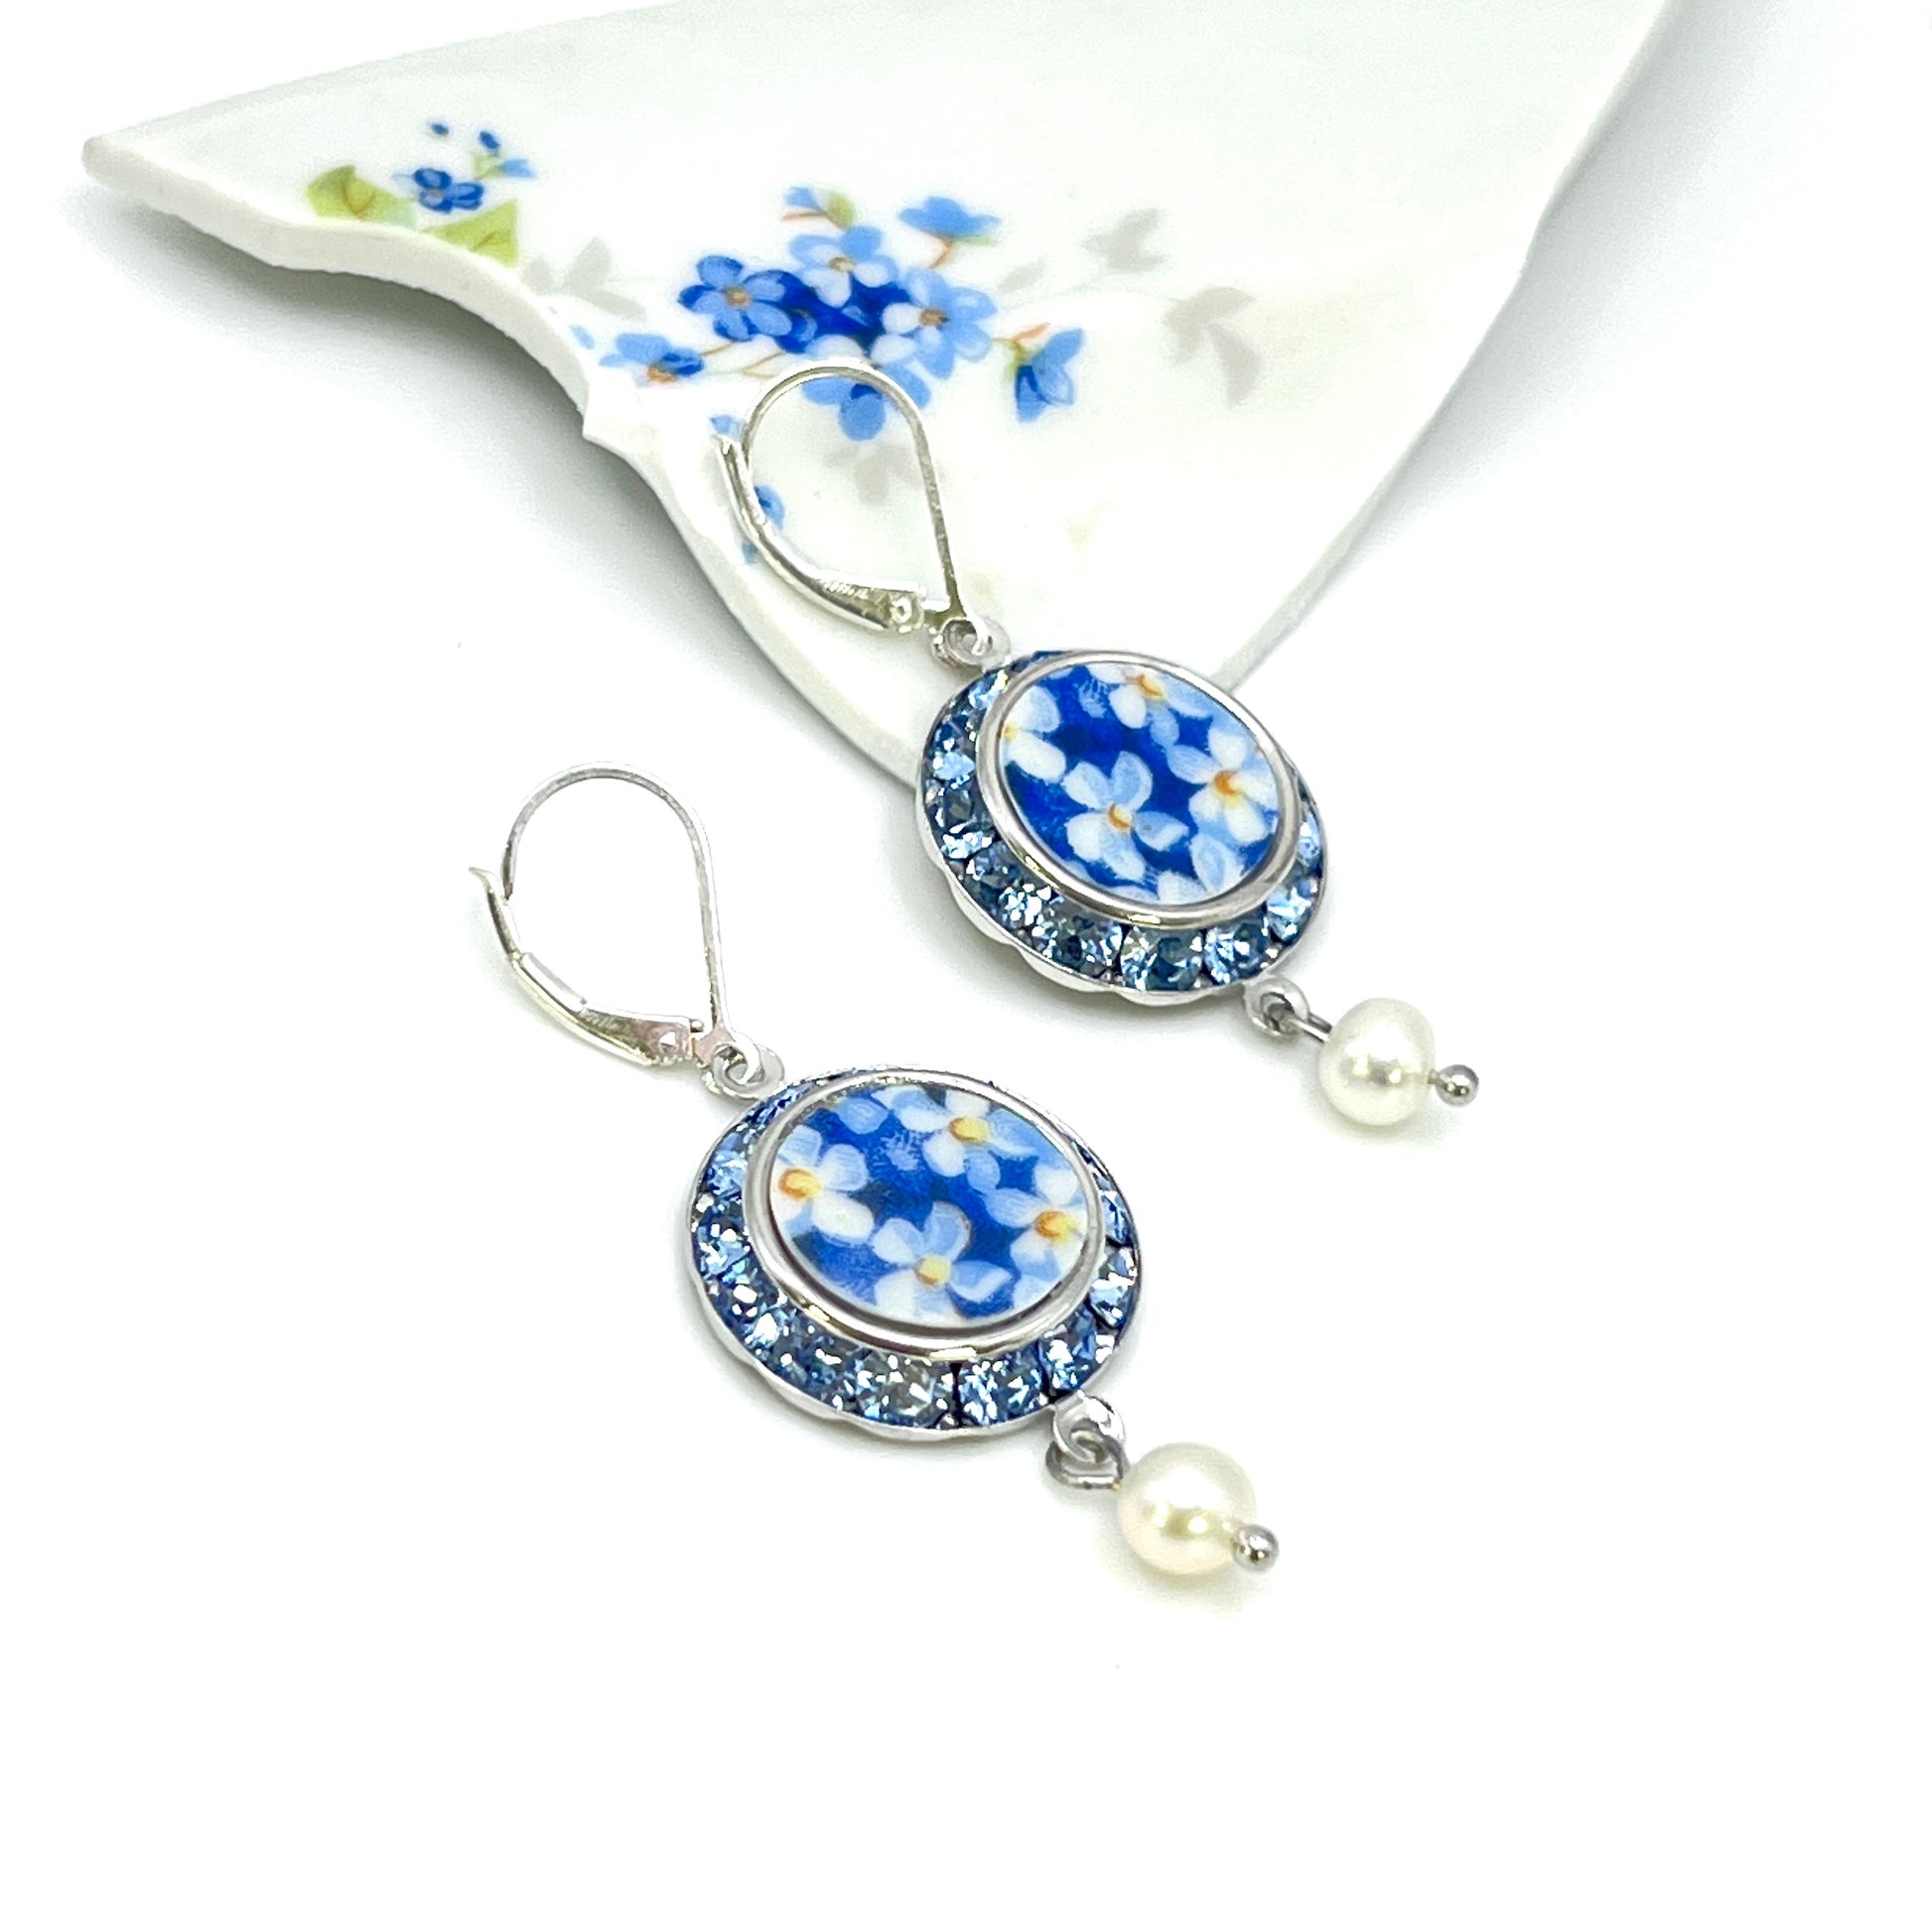 Crystal and Pearl Drop Earrings, Forget Me Not Earrings, Broken China Jewelry, Unique  Gifts for Women,